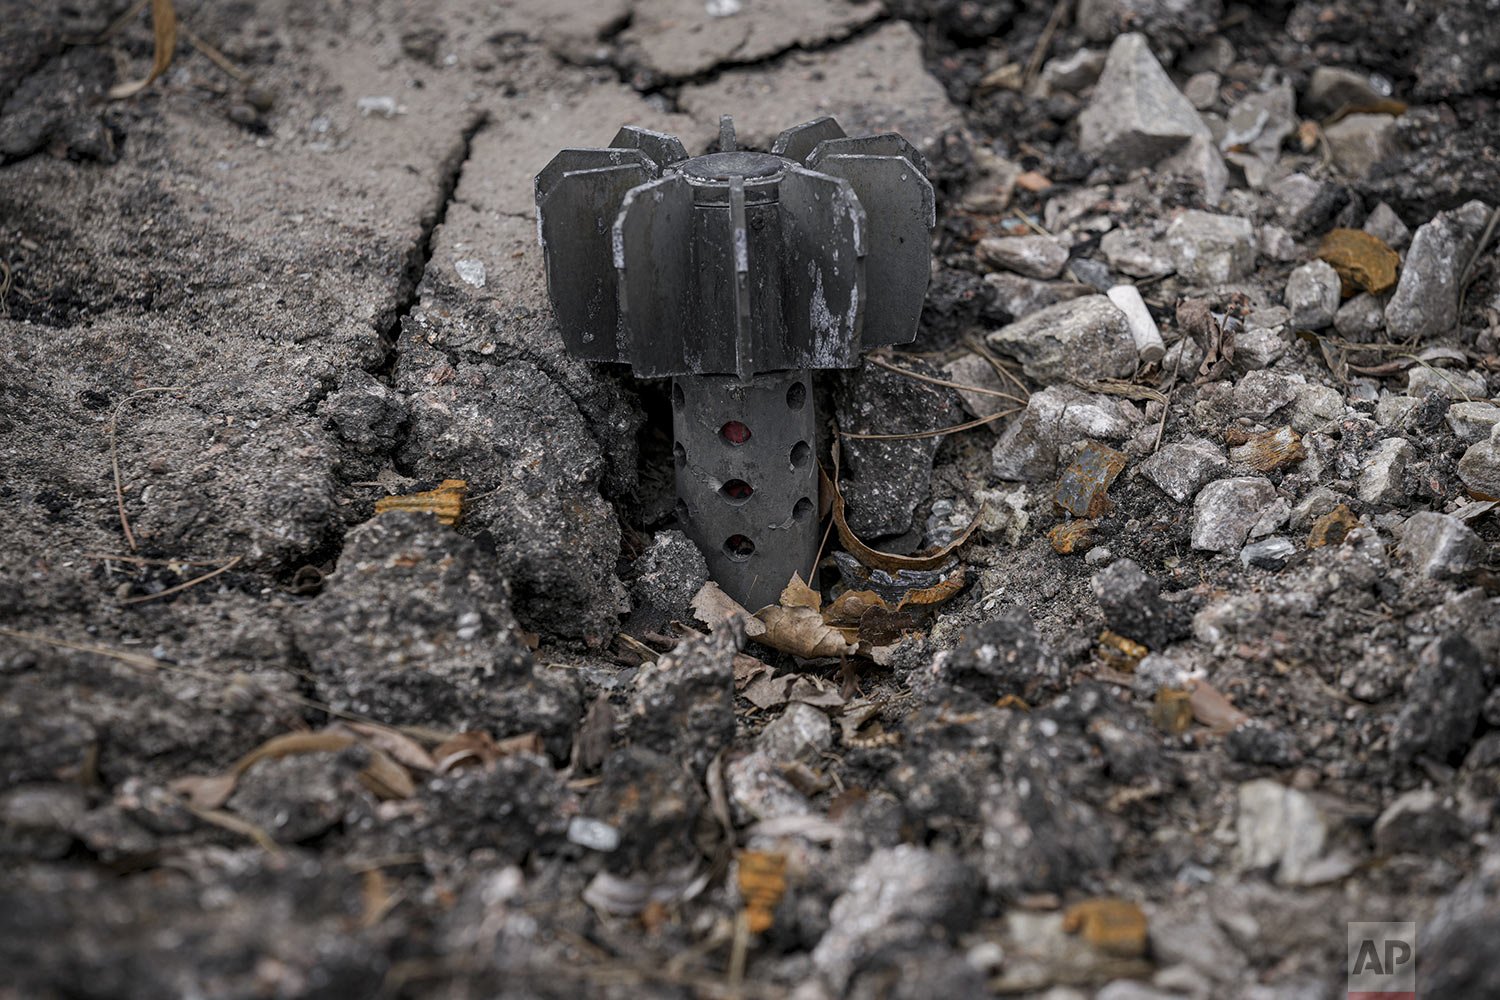  A part of a mortar shell sticks out of the asphalt in Stoyanka, Ukraine, Sunday, March 27, 2022. (AP Photo/Vadim Ghirda) 